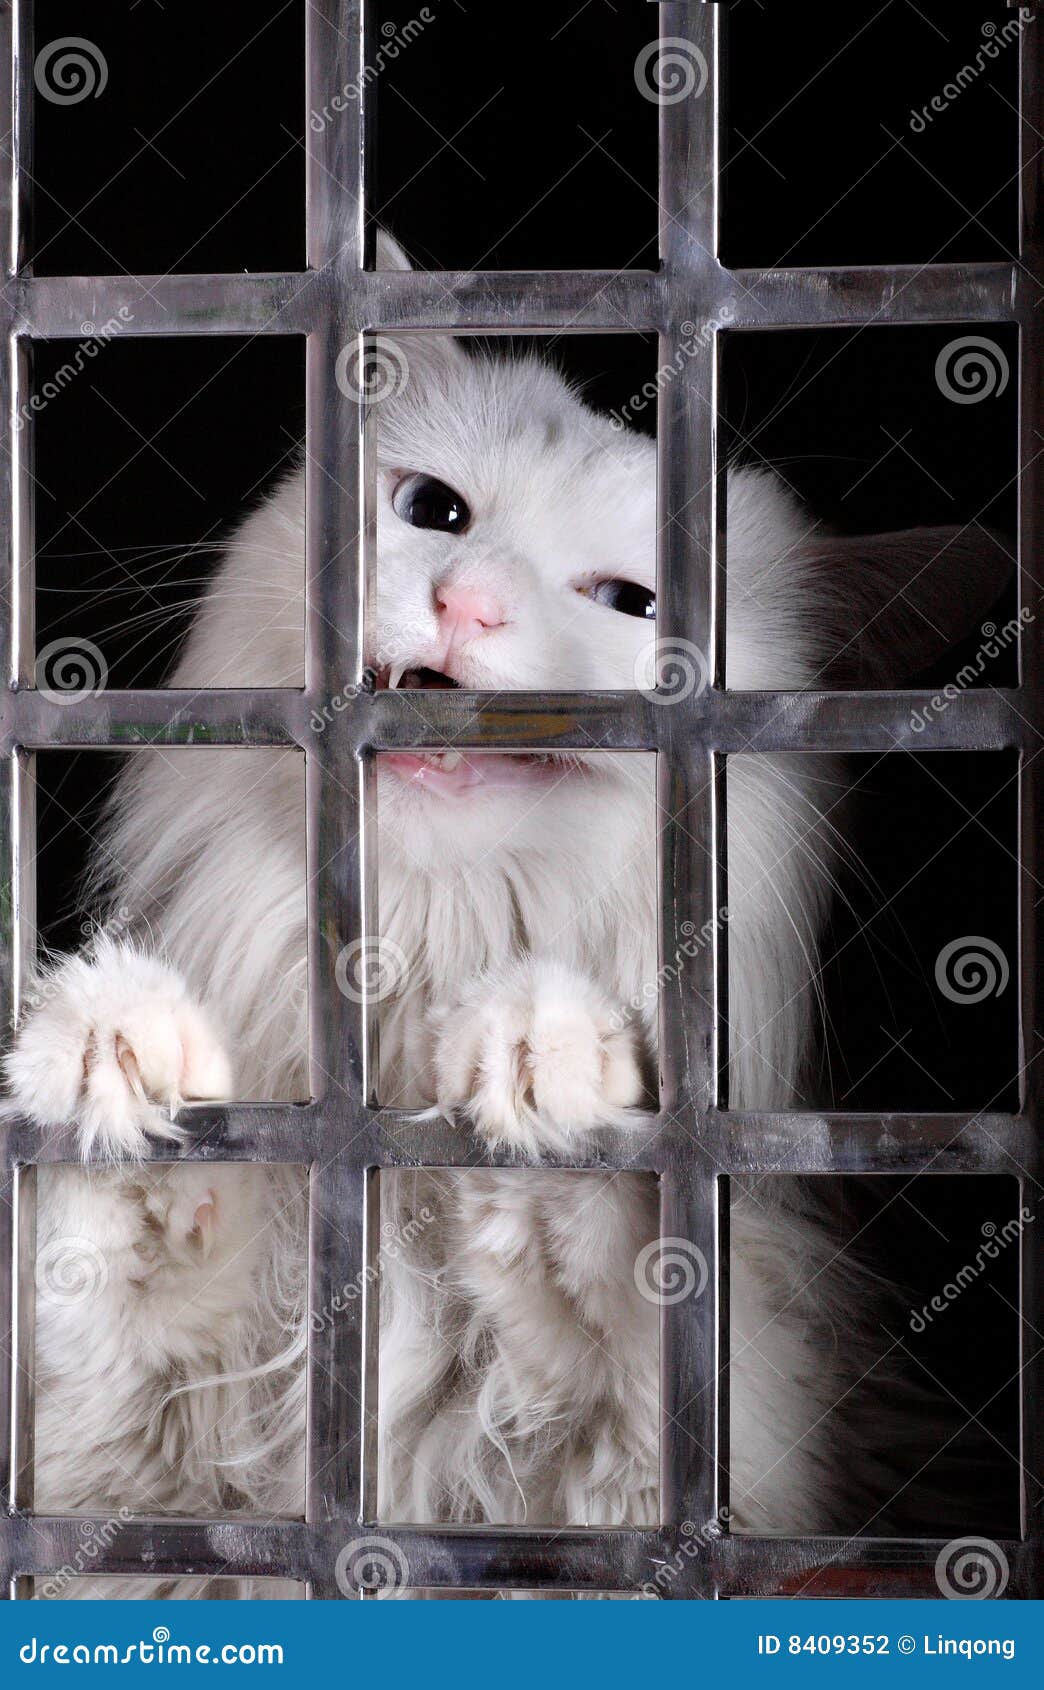 stray cat in cages.